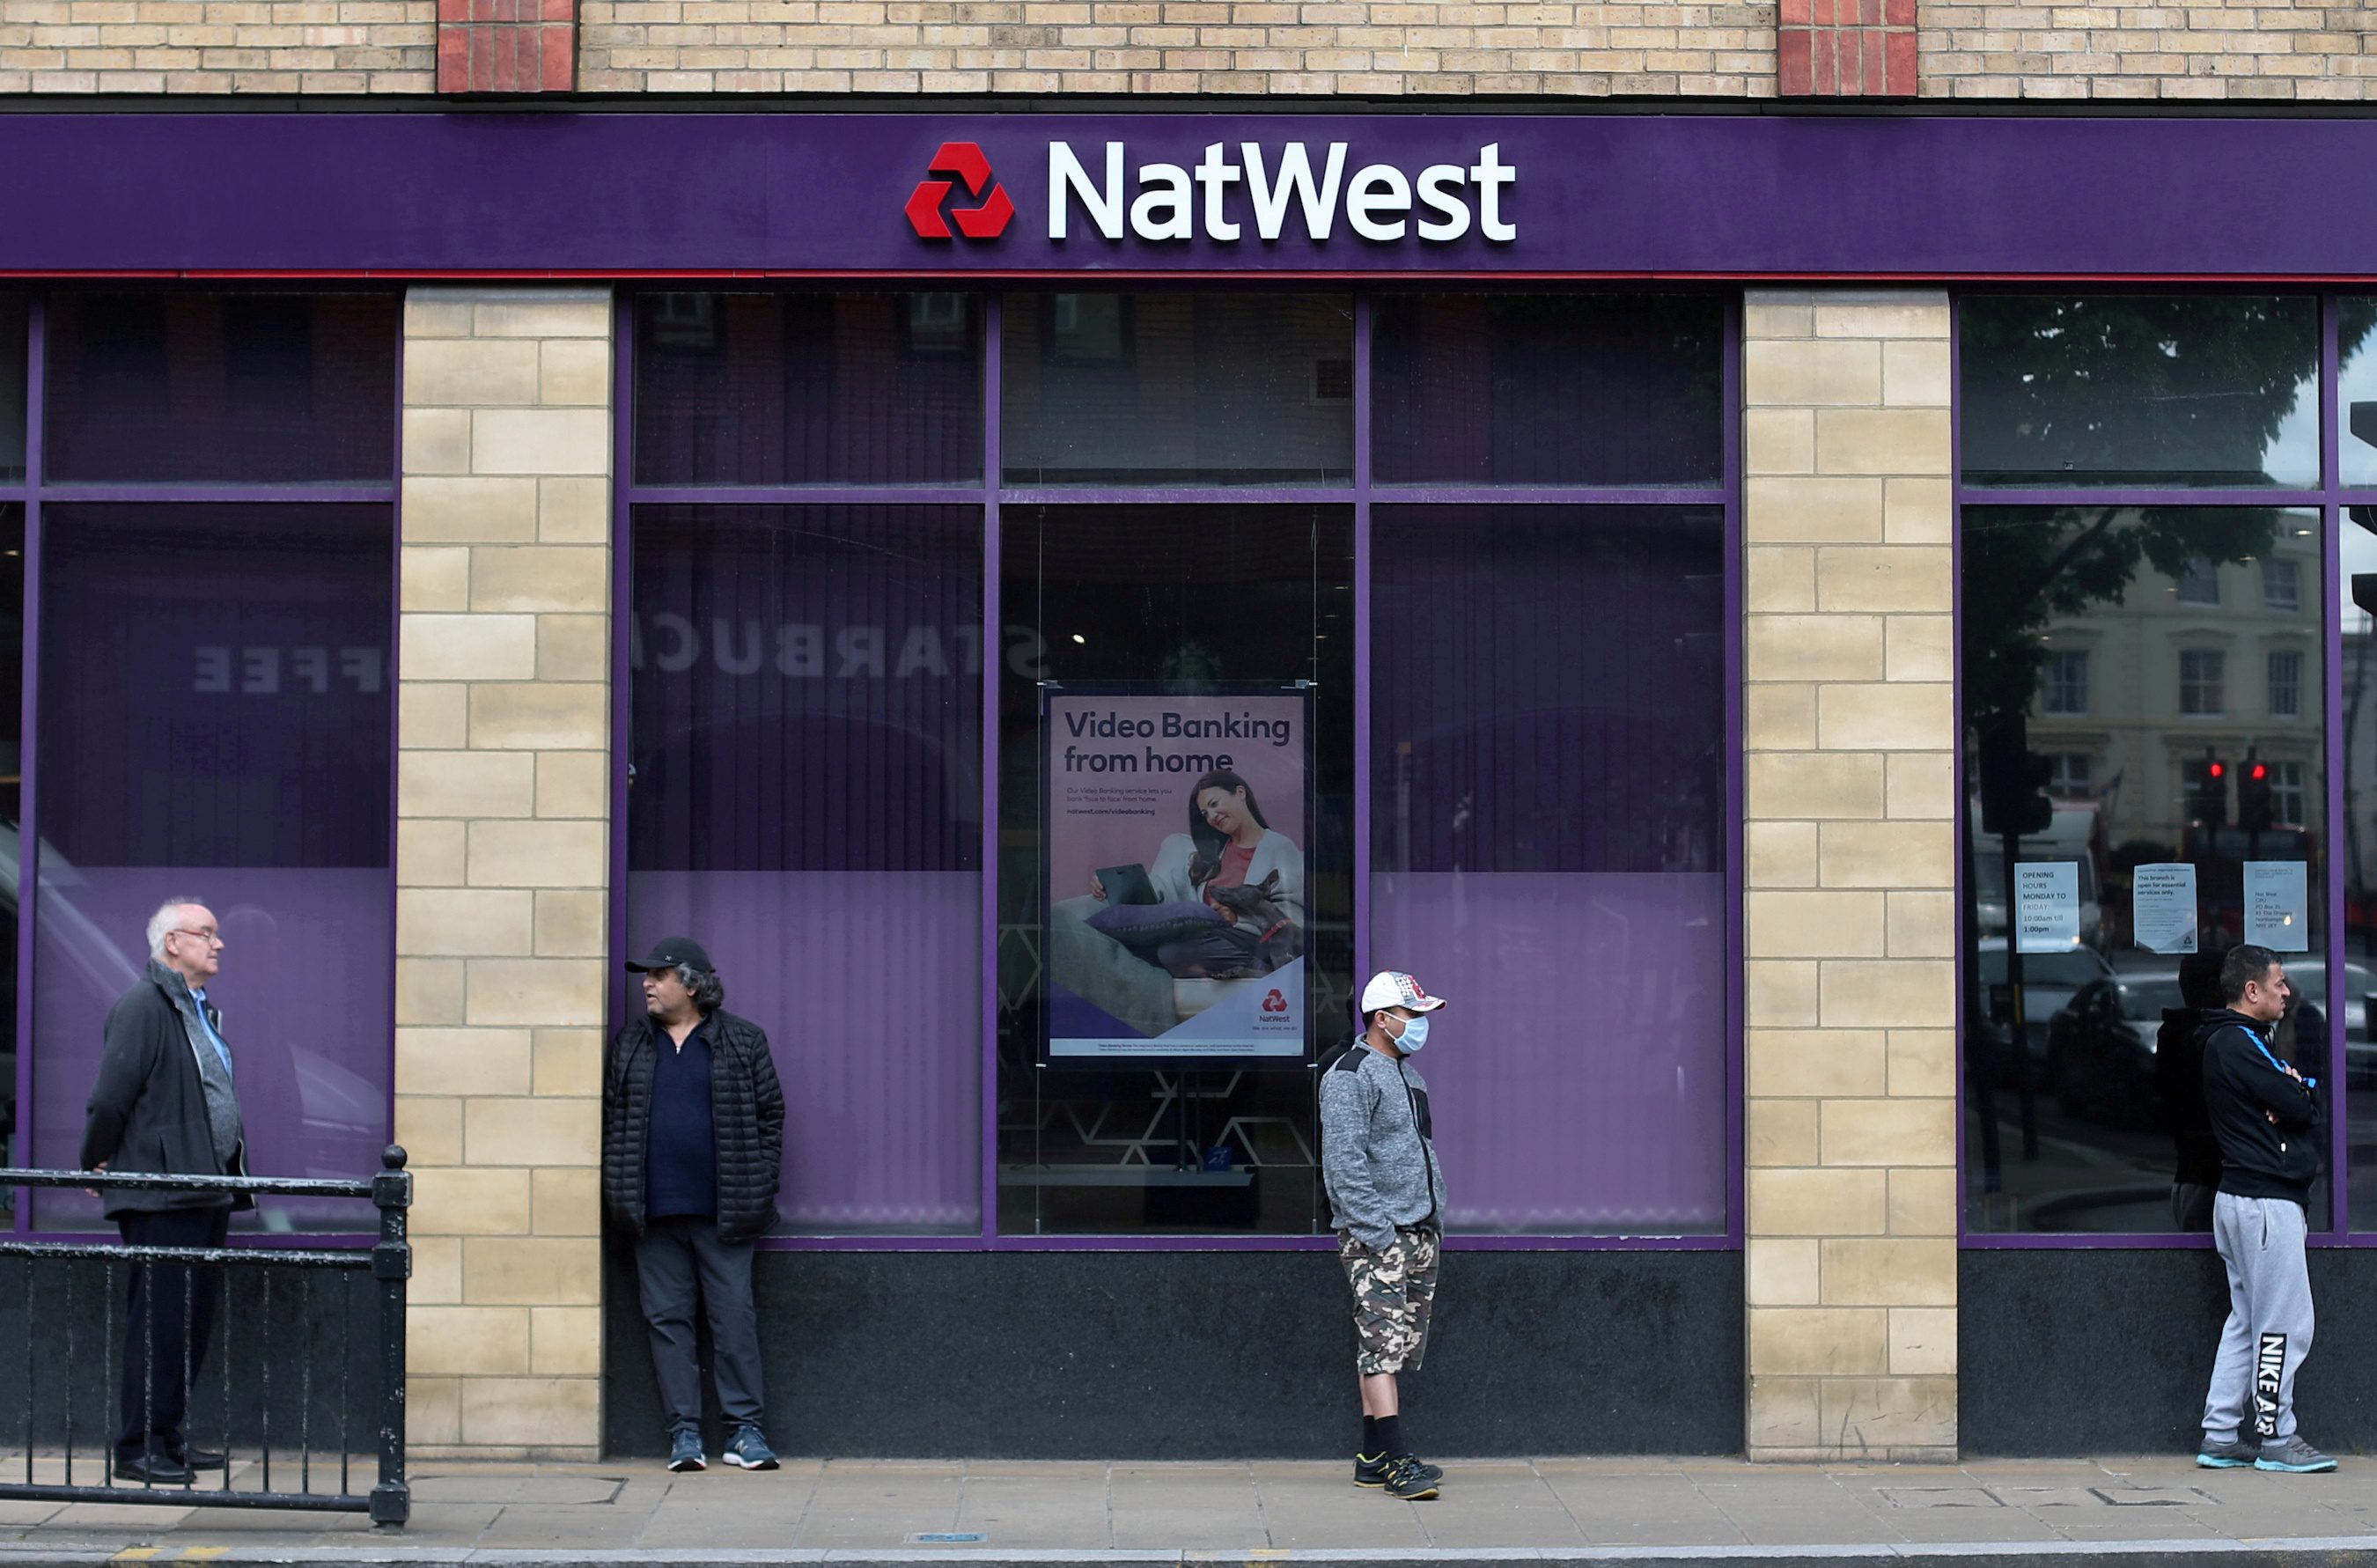 Britain’s NatWest bank faces money laundering charges